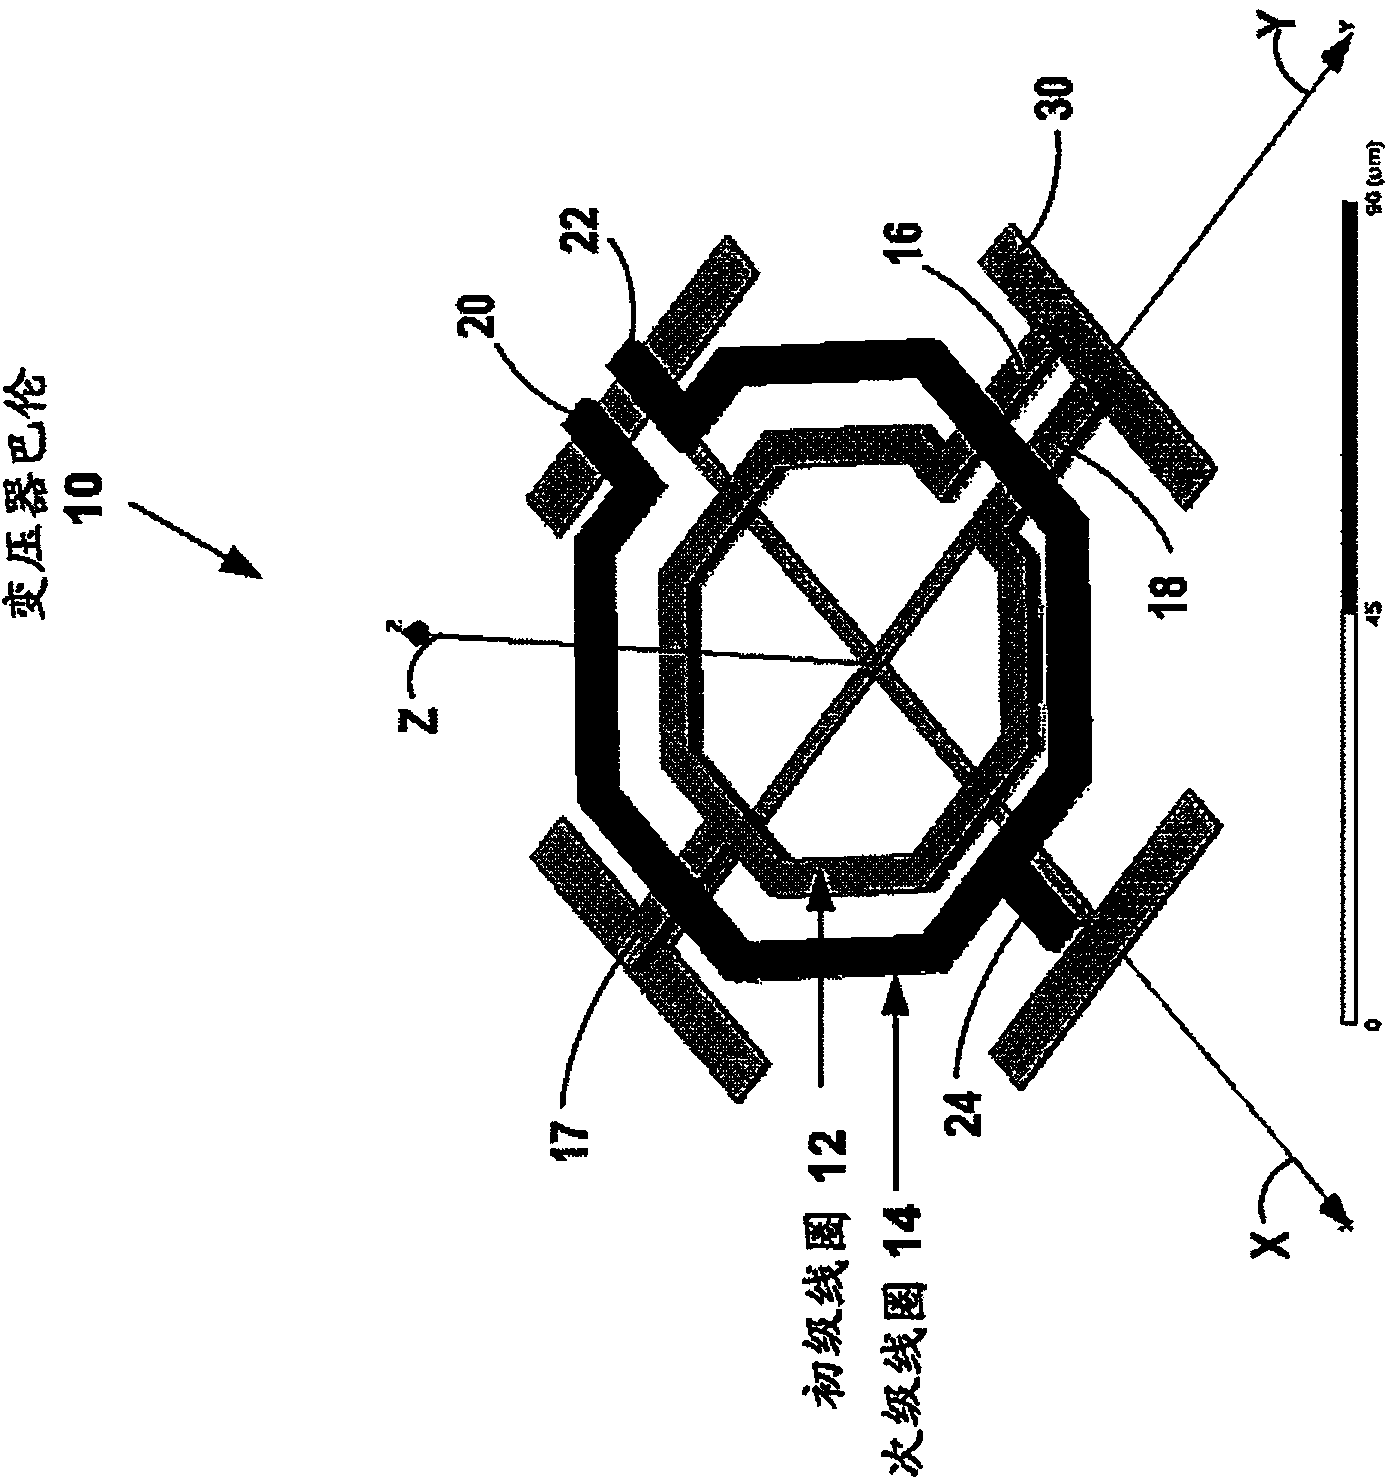 Integrated transformer balun with enhanced common-mode rejection for radio frequency, microwave, and millimeter-wave integrated circuits